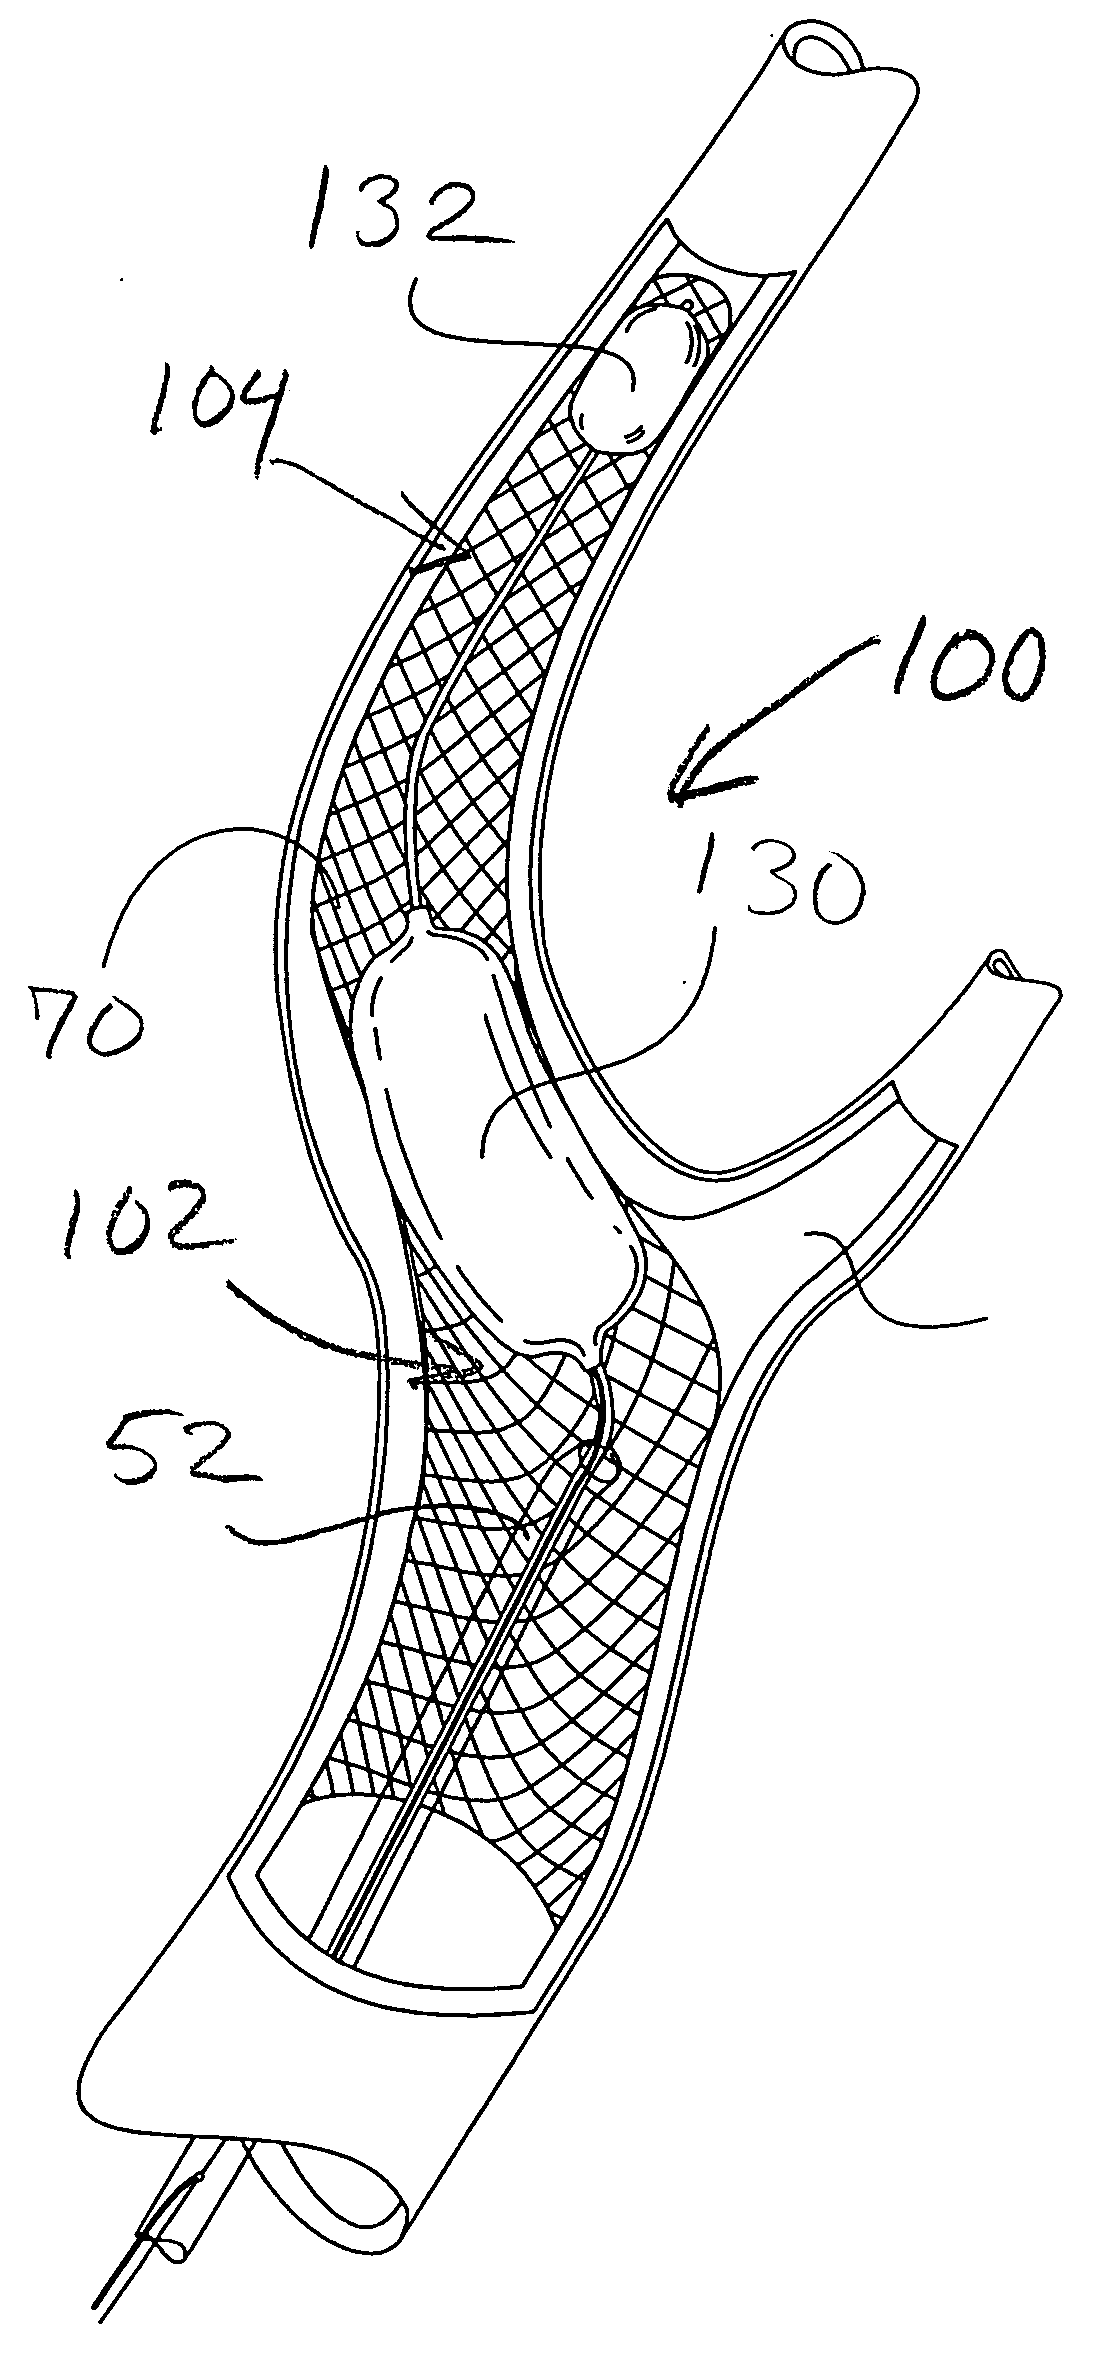 Method of performing protected angioplasty and stenting at a carotid bifurcation